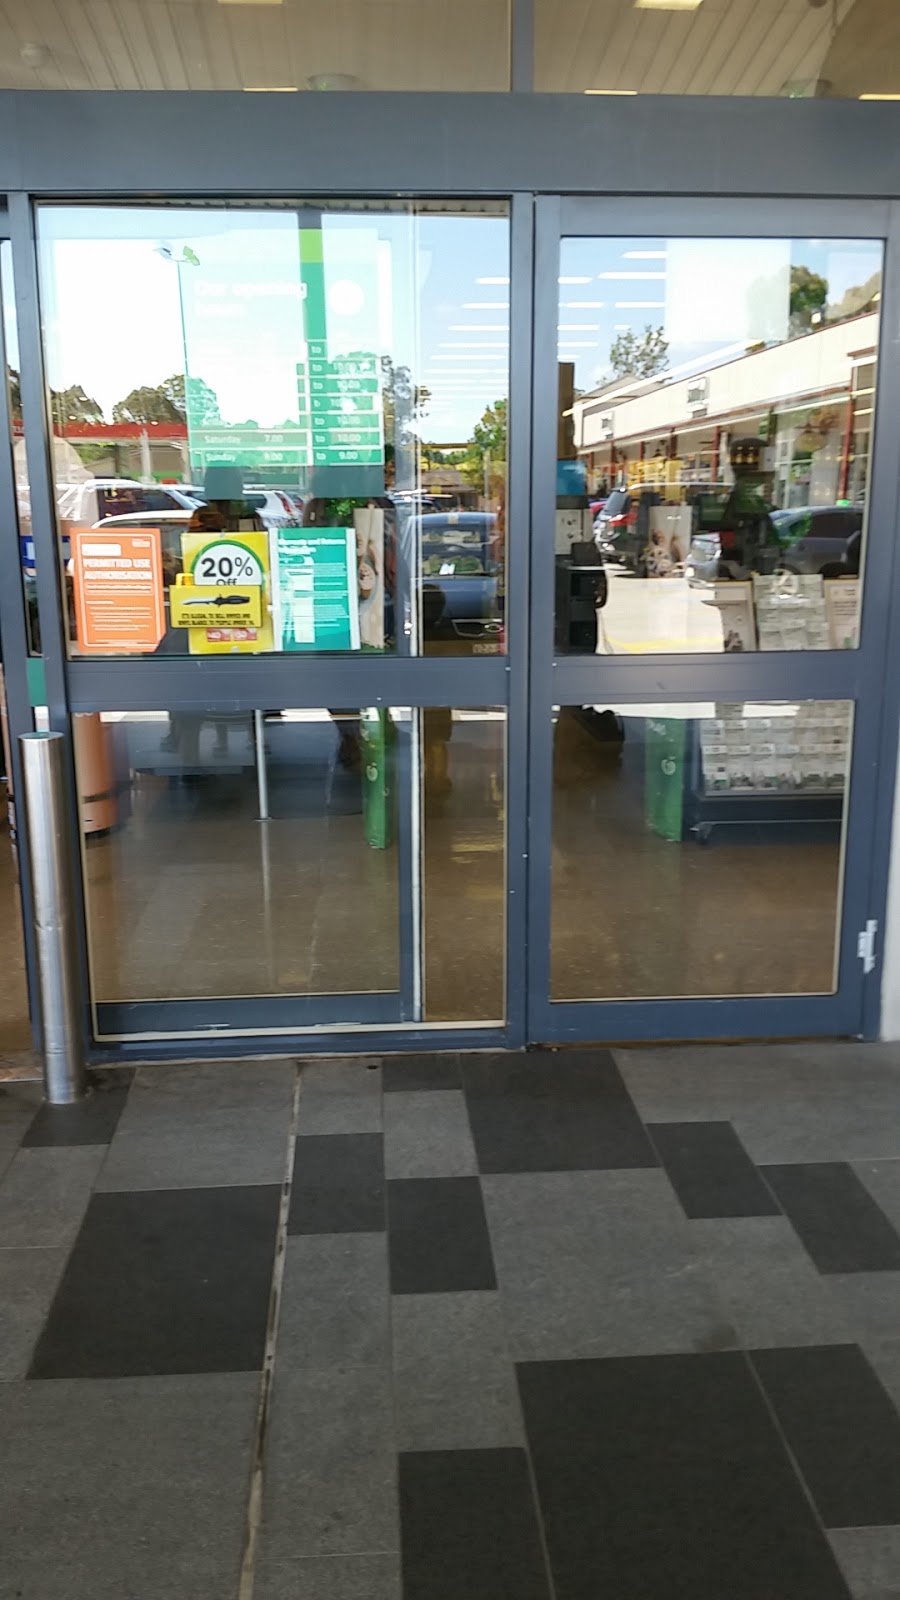 Woolworths Tahmoor | supermarket | 117 Remembrance Driveway &, Thirlmere Way, Tahmoor NSW 2573, Australia | 0246776200 OR +61 2 4677 6200